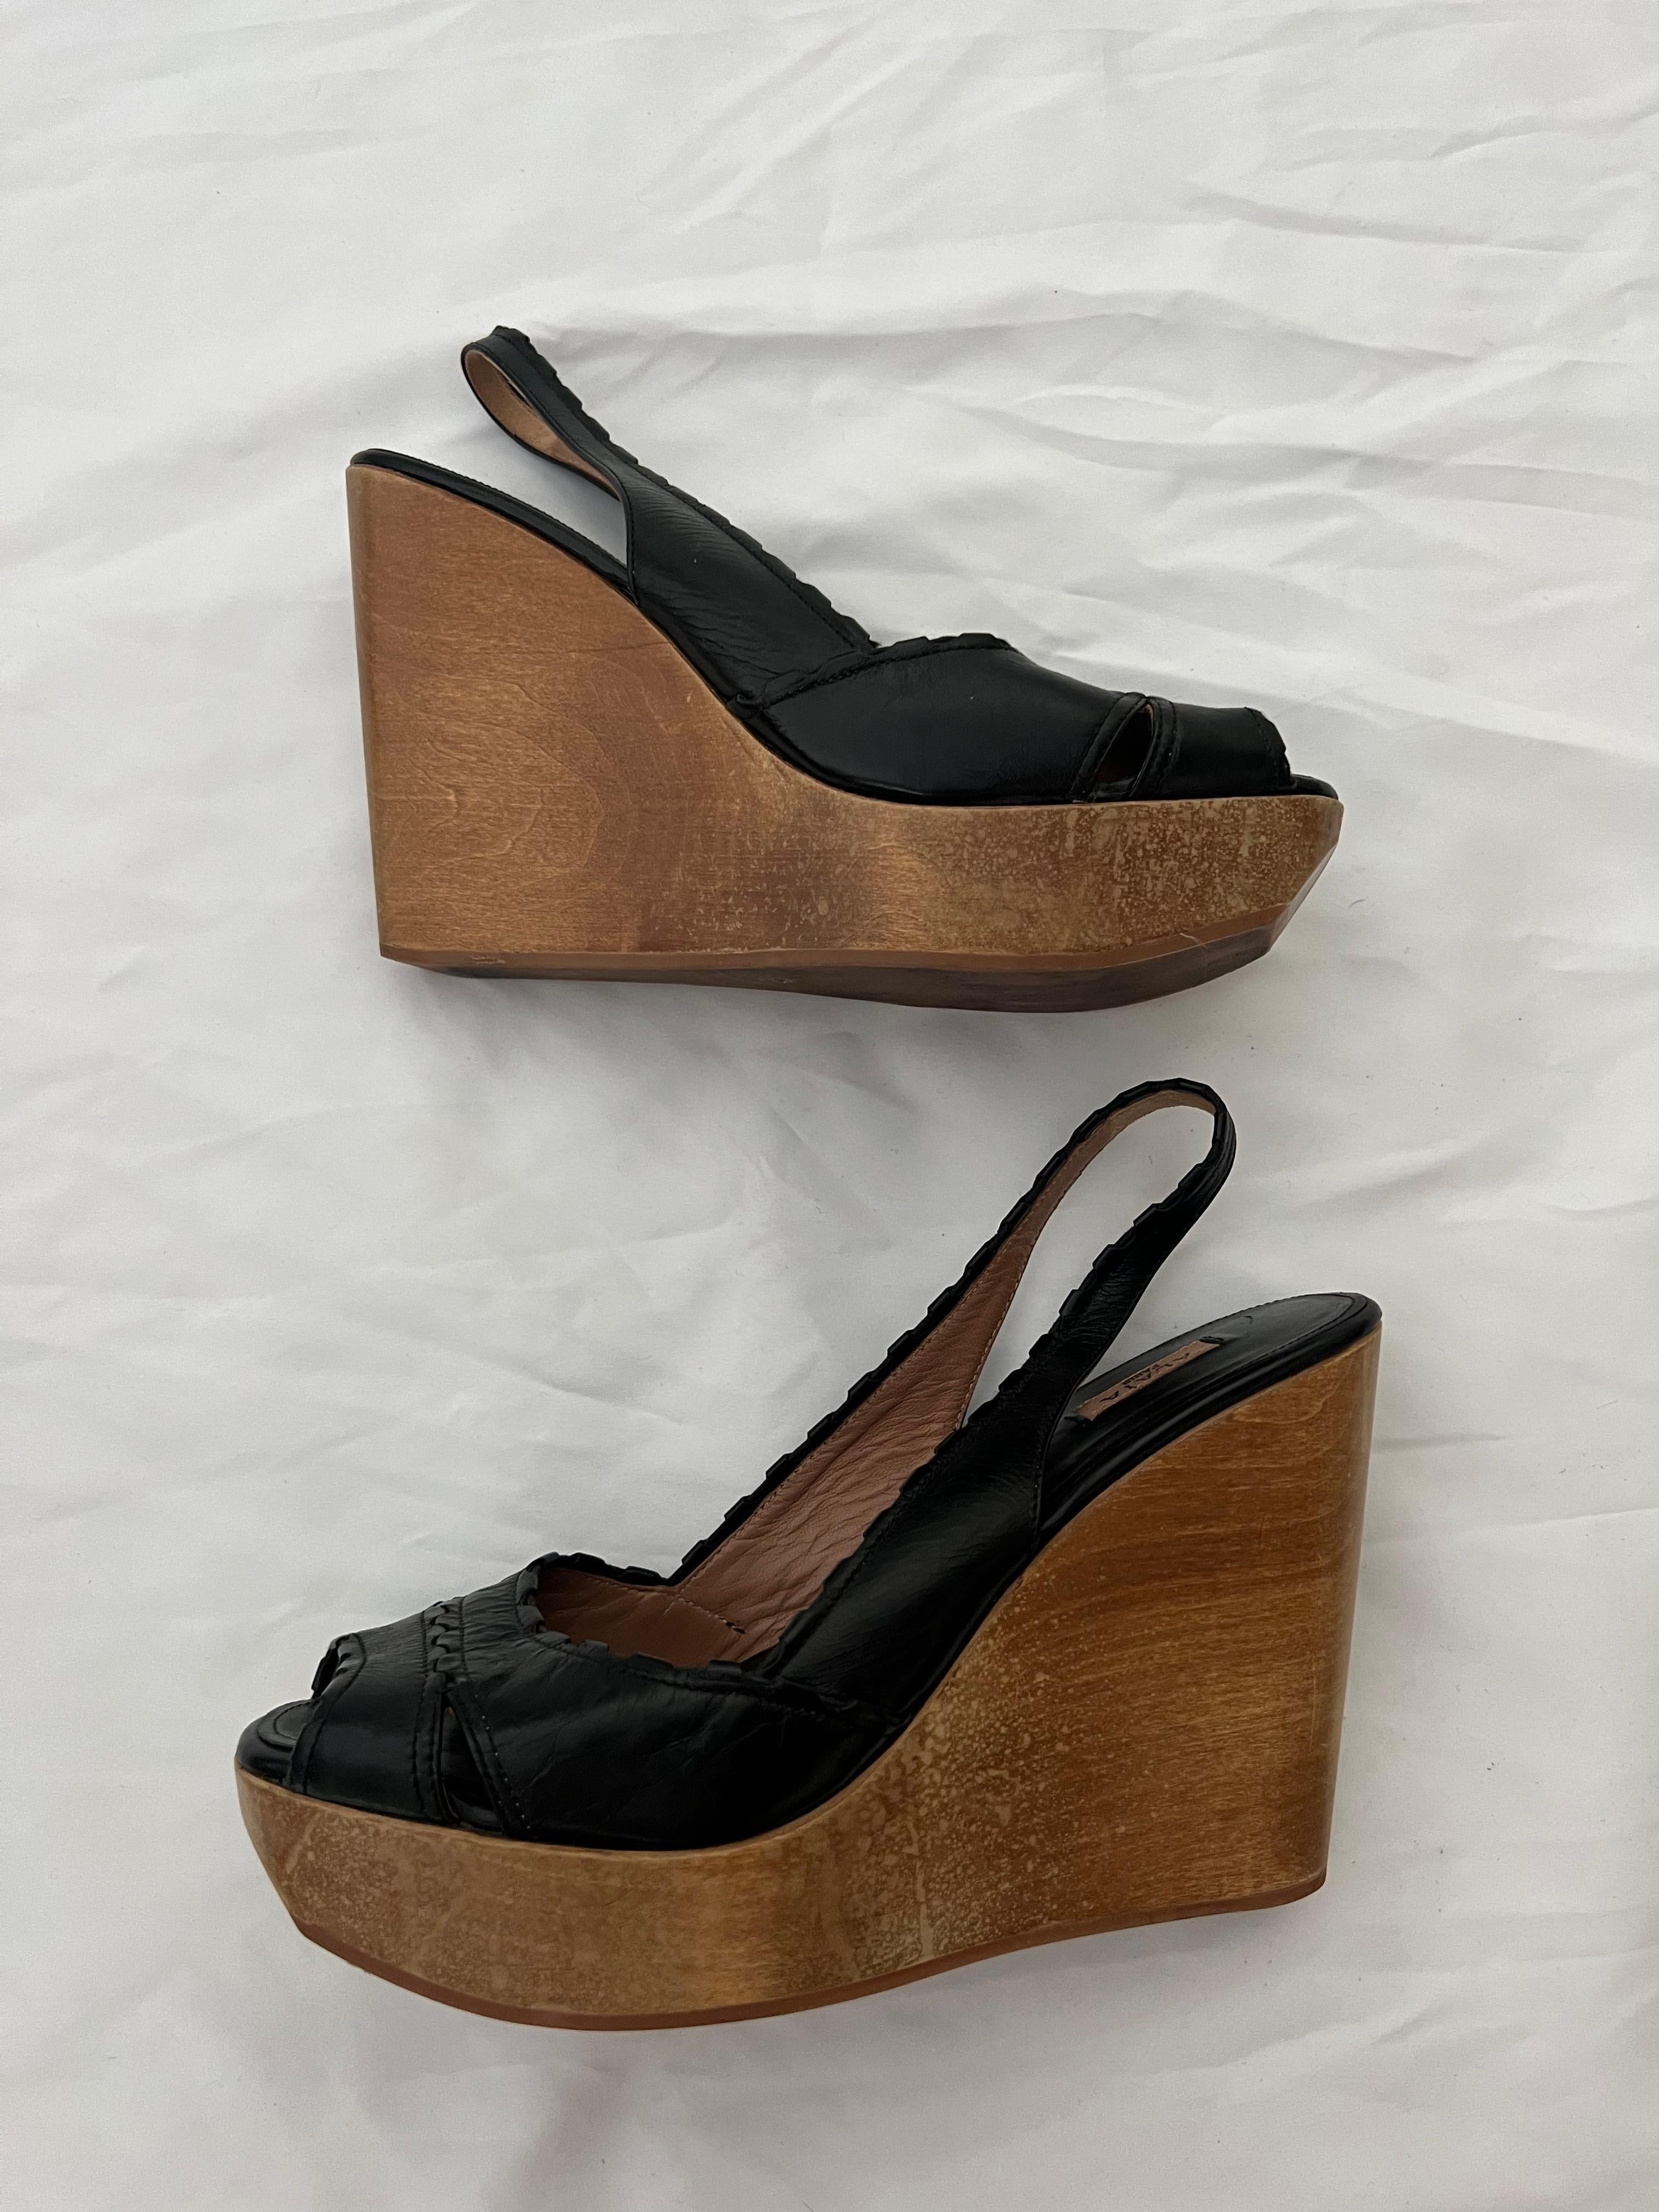 - Brown leather
- Open Toe
- Wood platform
- Slingback
- Made in Italy
- Brand new, never worn 